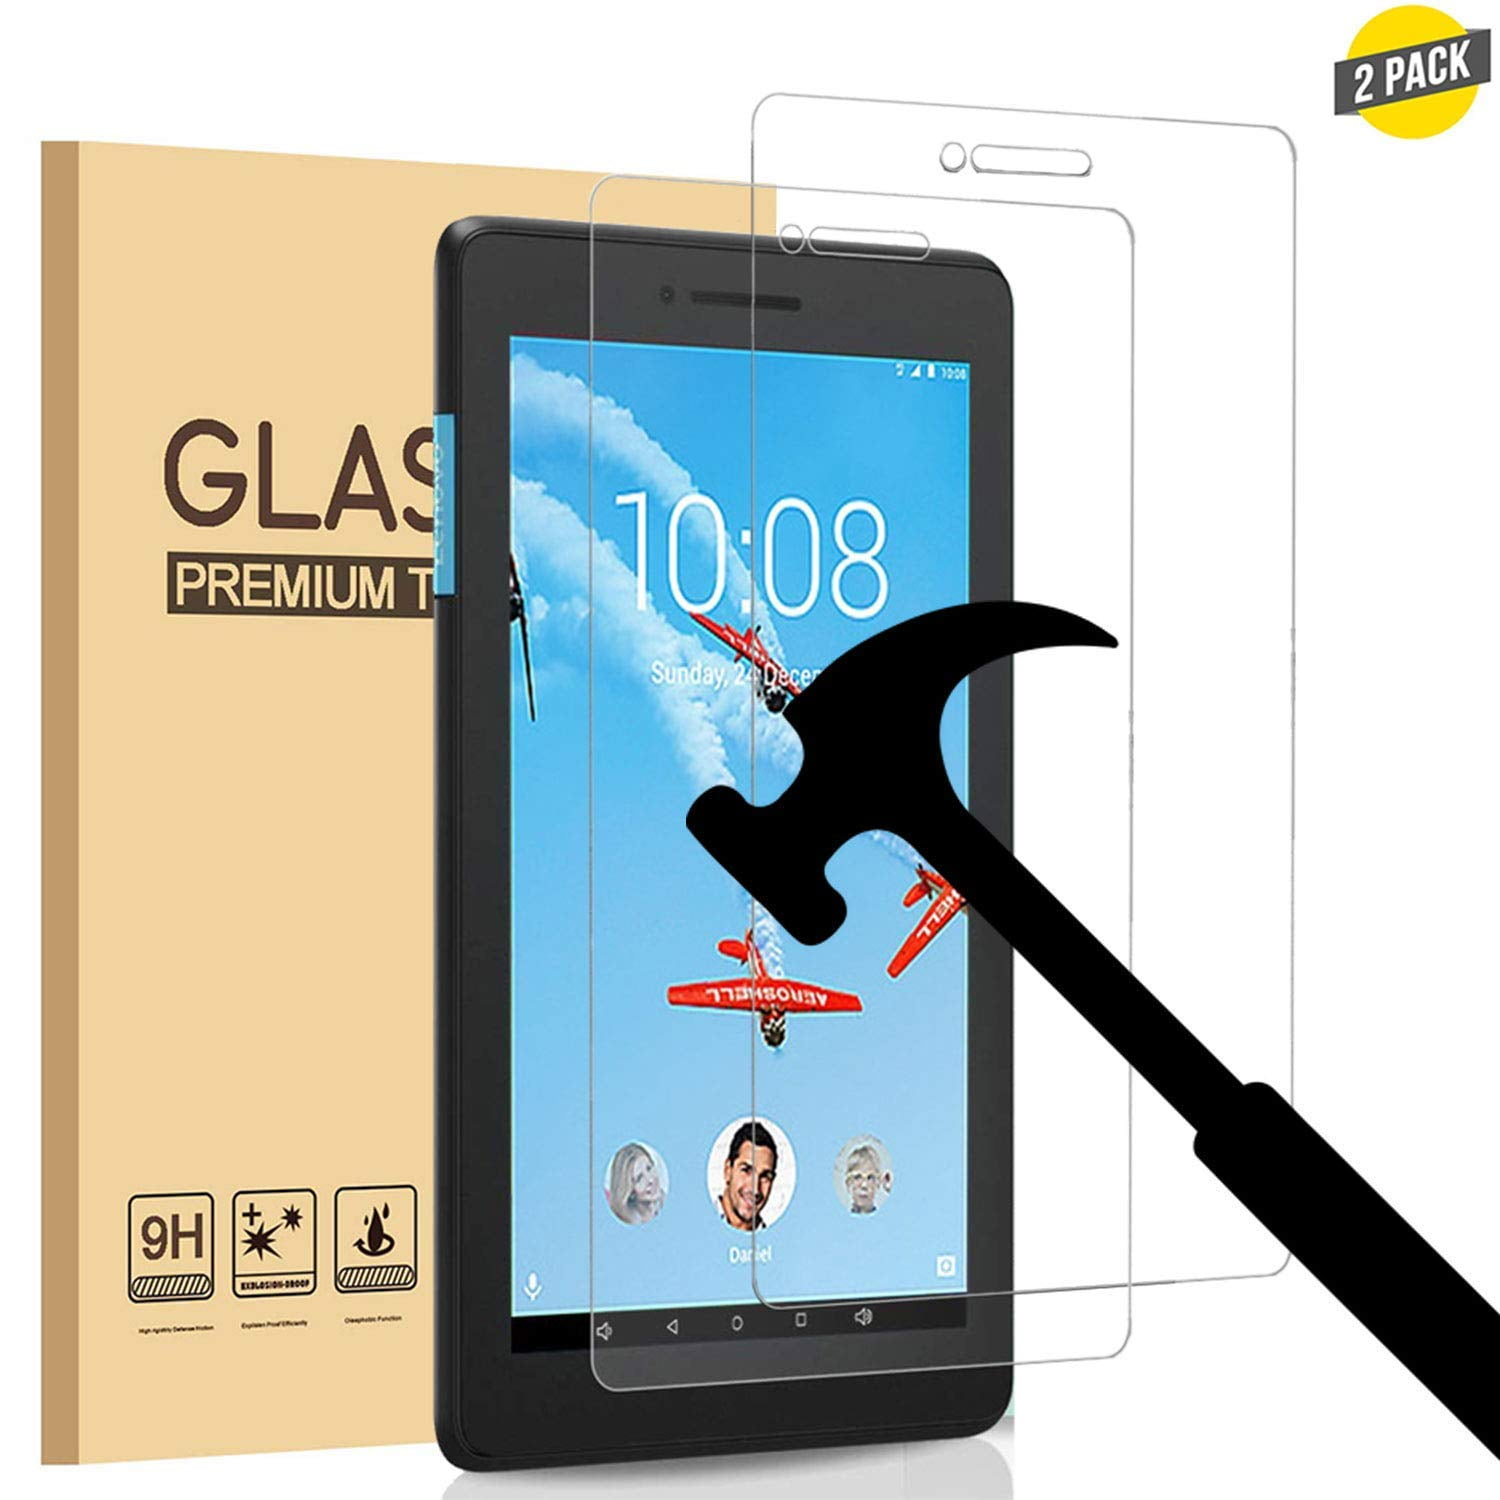 2017 Model TabletHutBox Tempered Glass Screen Protector for Lenovo Tab 4 8" 